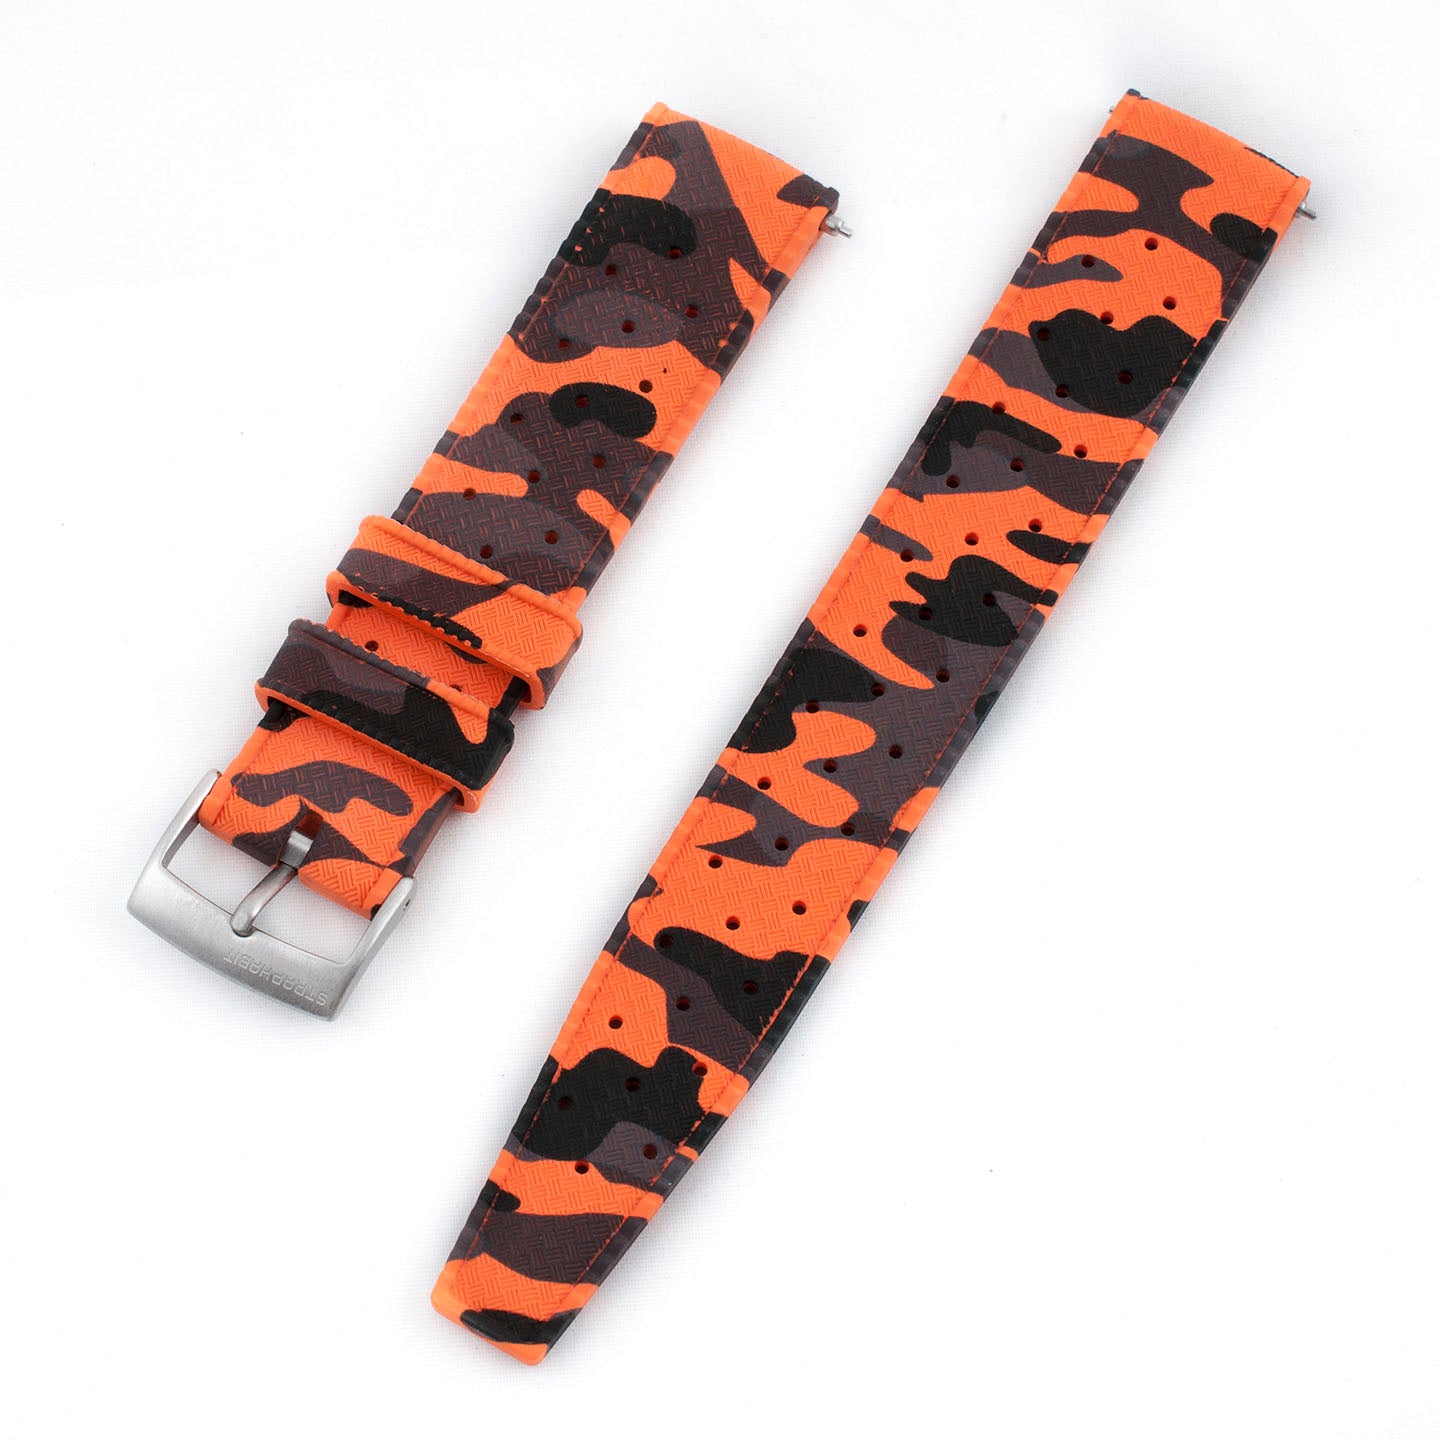 Tropical retro vintage replacement watch strap band FKM rubber tropic 19mm 20mm 21mm 22mm orange camo camouflage